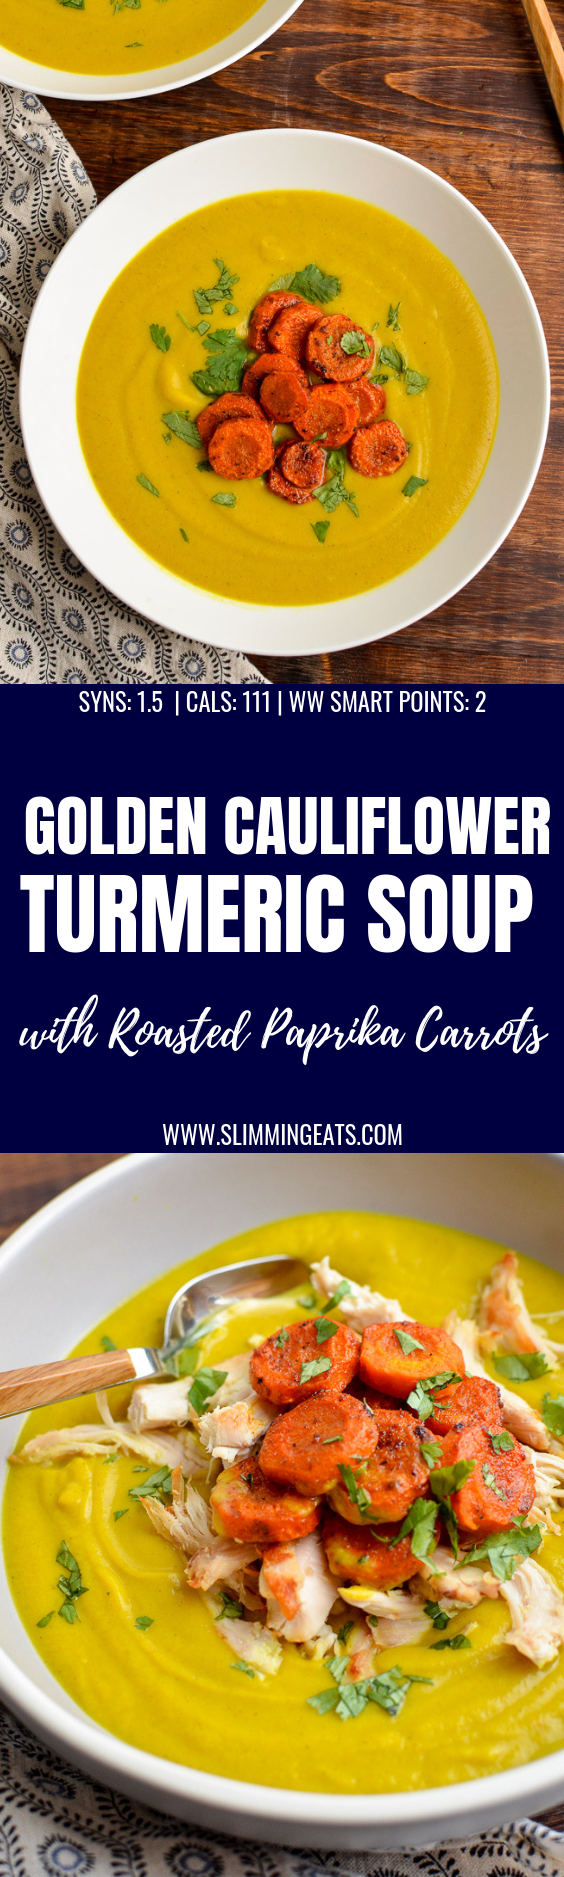 The beautiful vibrant colour of turmeric makes this delicious and healthy Low Syn Golden Cauliflower Soup with Roasted Paprika Carrots | gluten free, dairy free, paleo, Whole30, Slimming World and Weight Watchers friendly